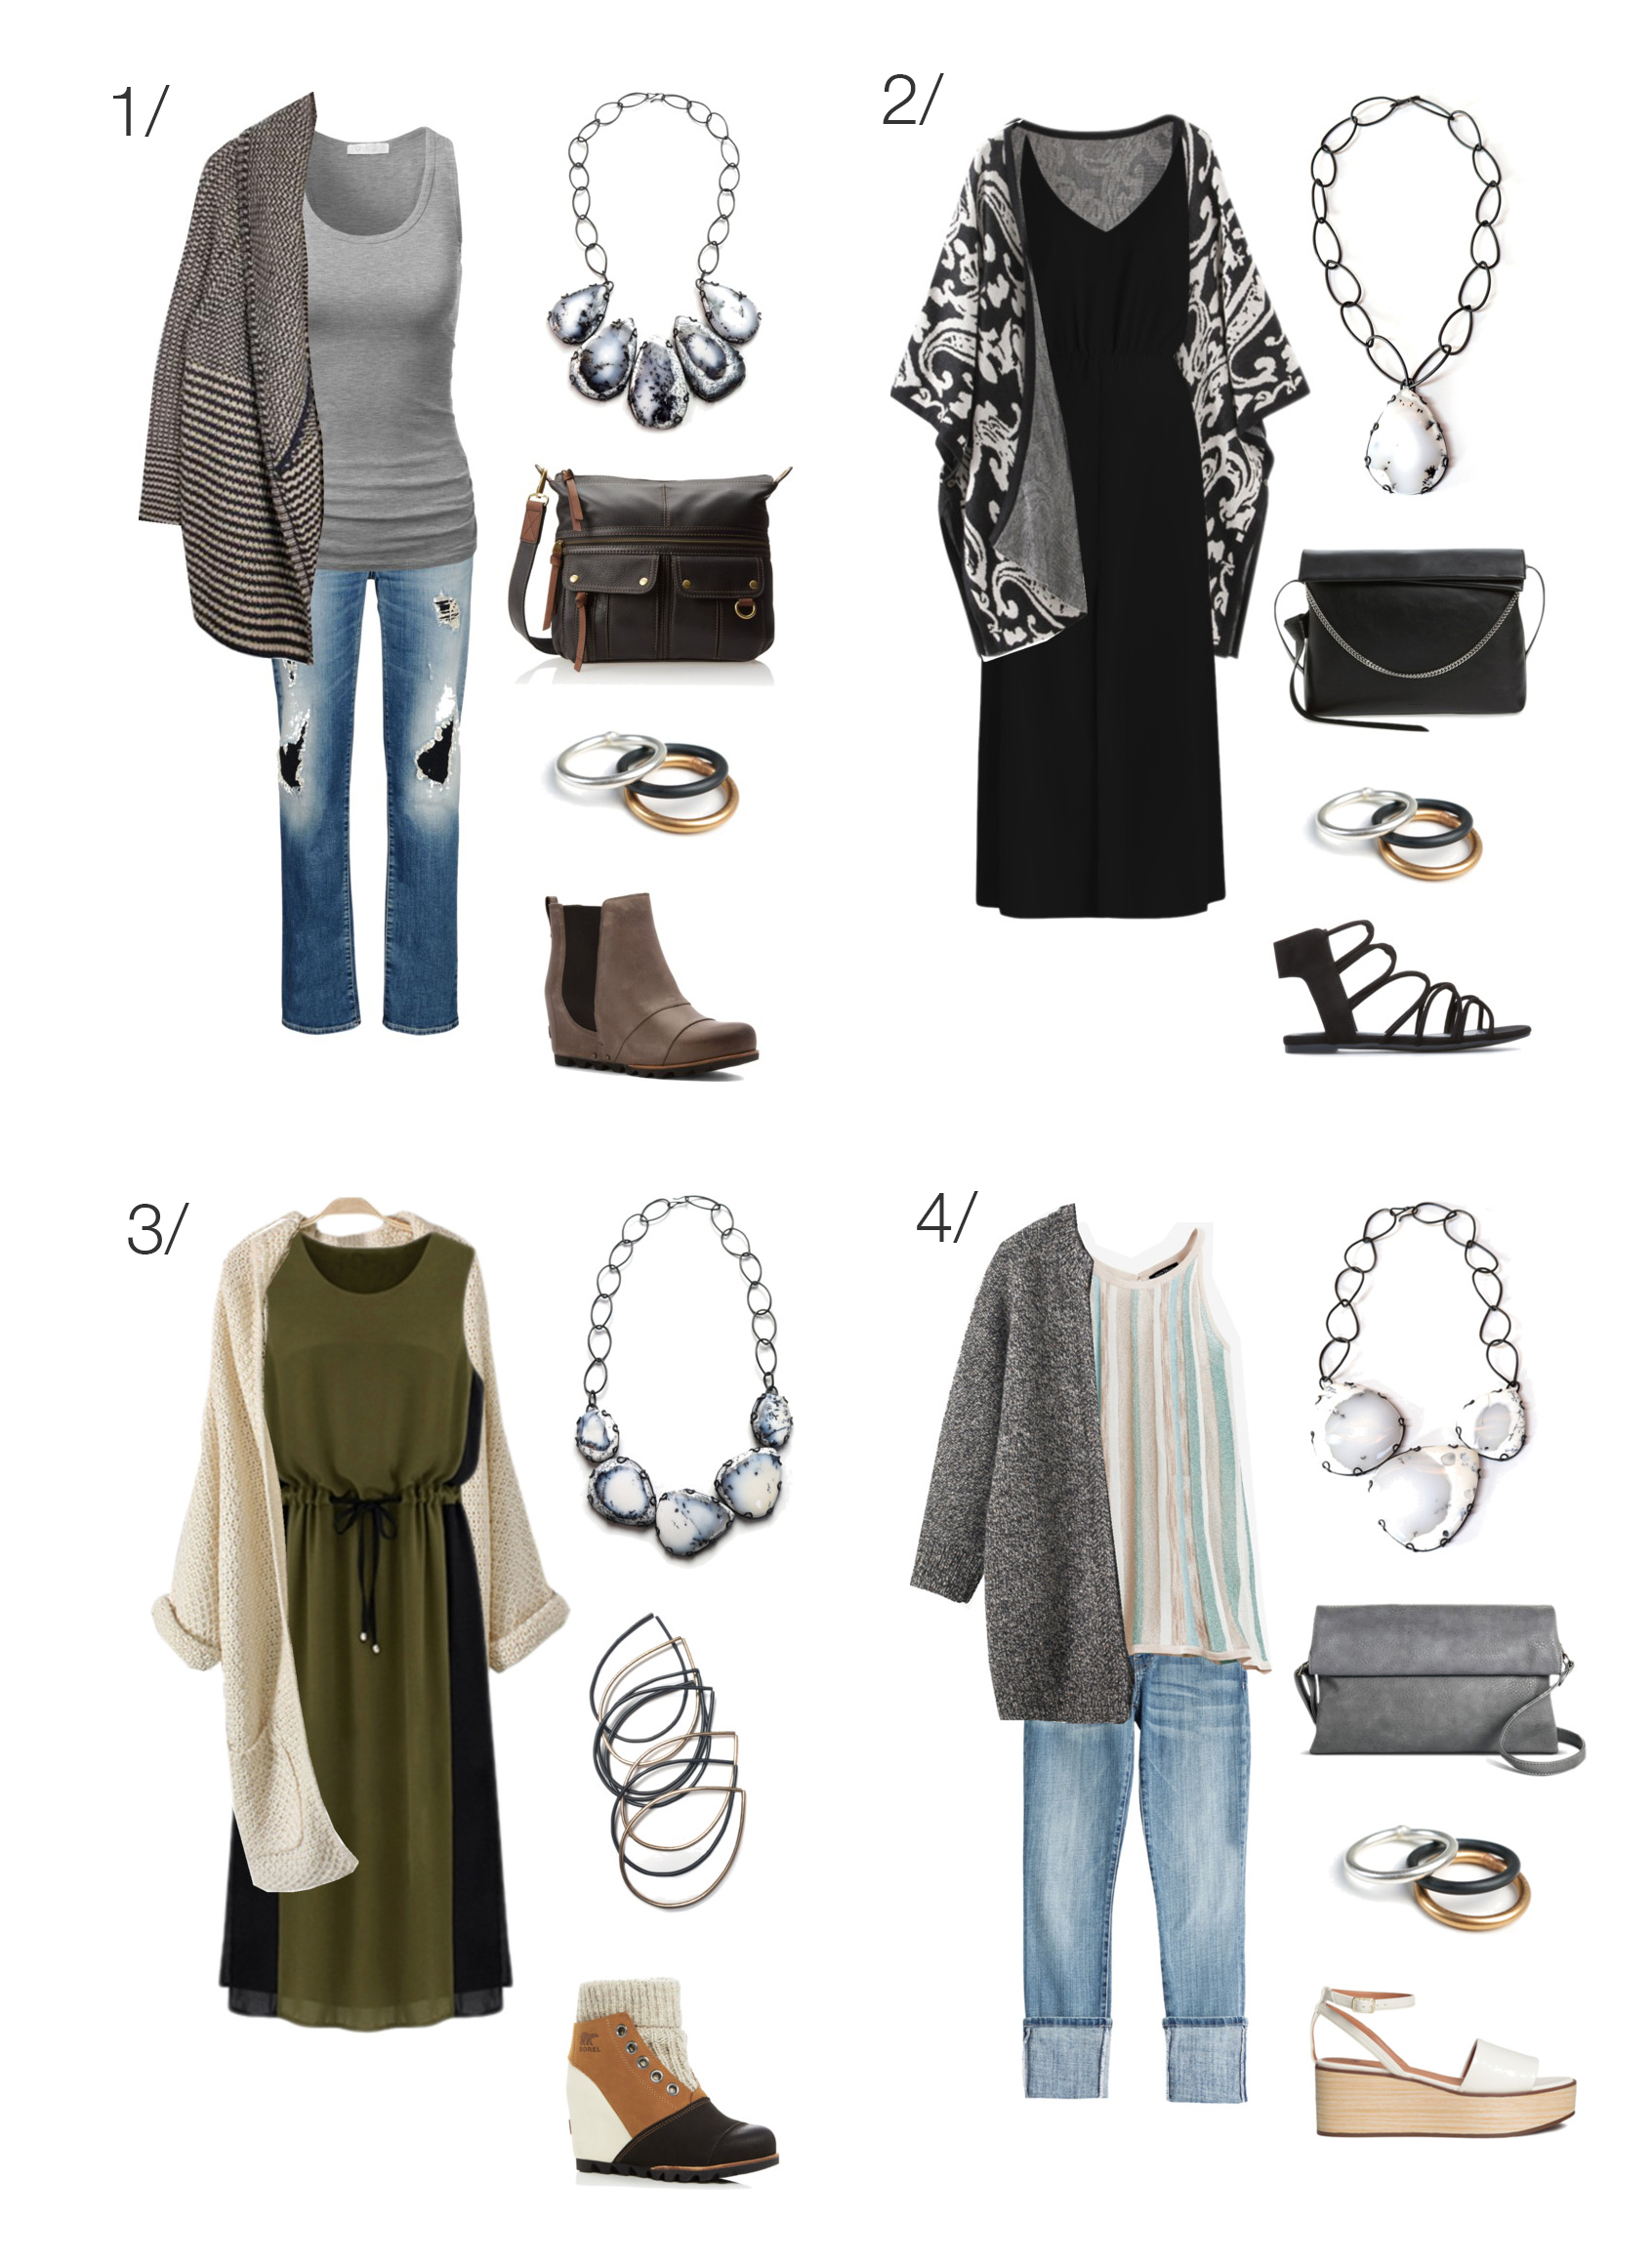 CARDIGAN OUTFIT IDEAS  HOW TO STYLE A CARDIGAN SWEATER 